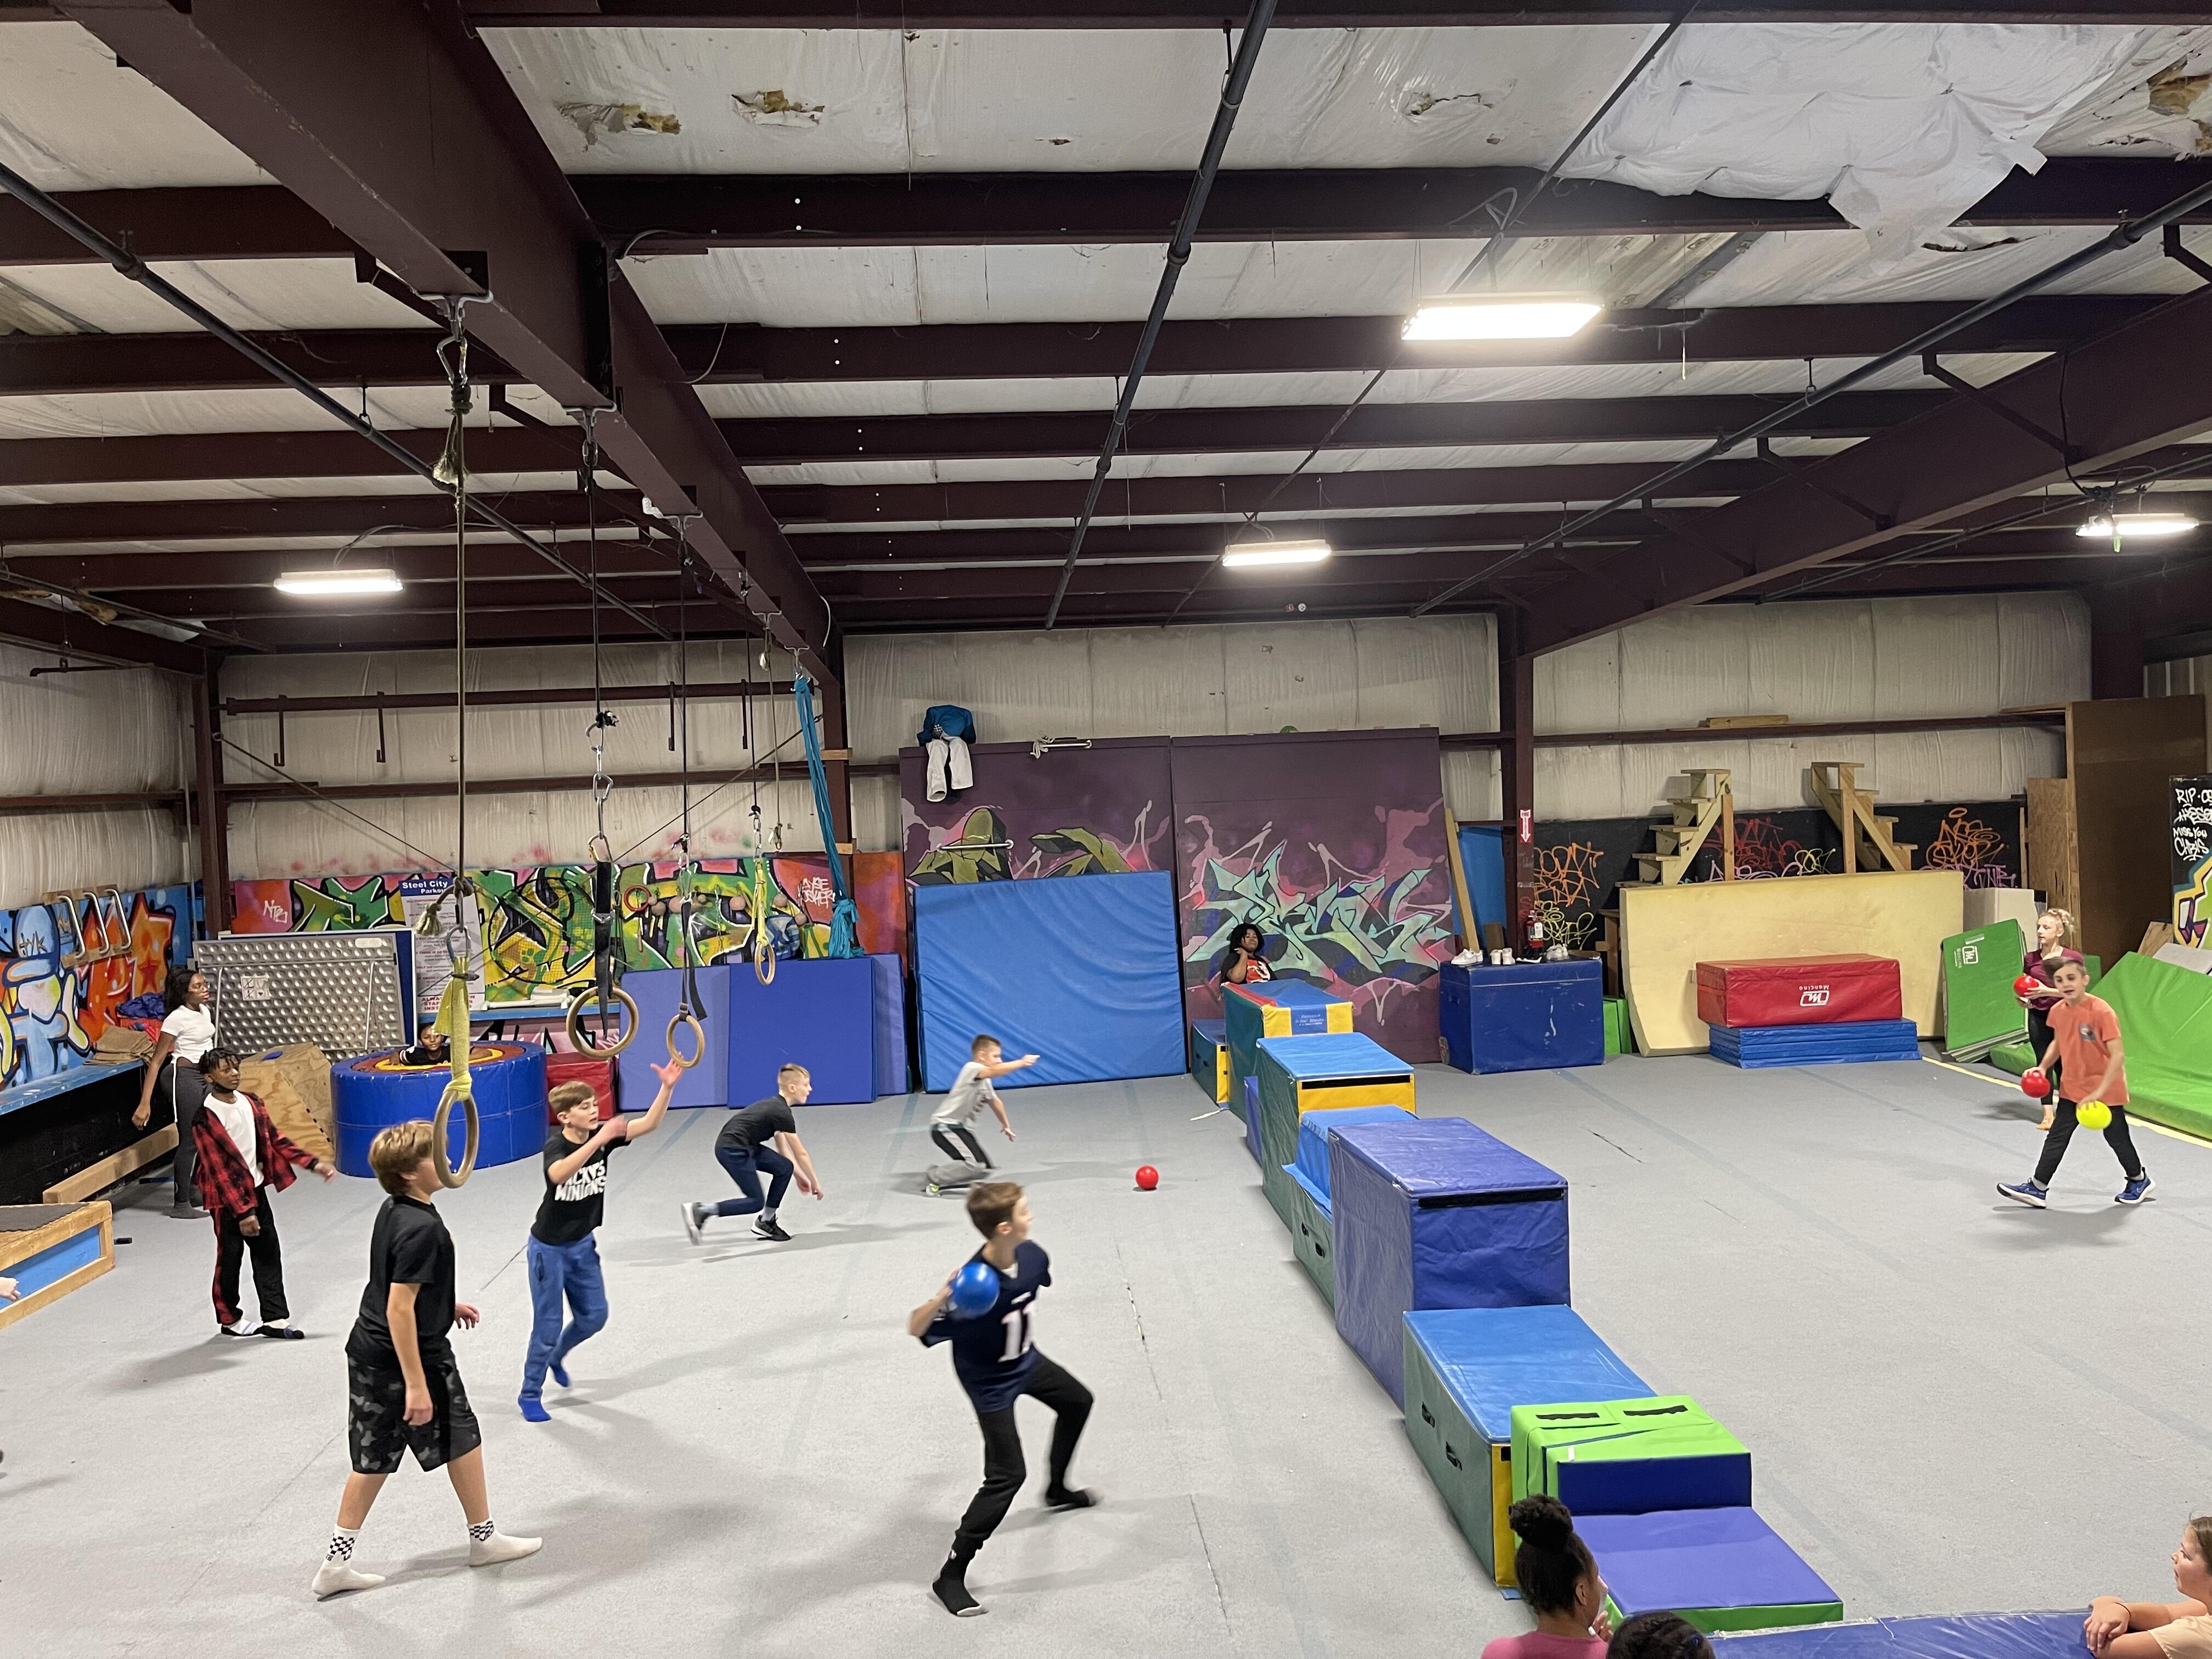 Middle school students play dodgeball in a warehouse filled with trampolines and padding